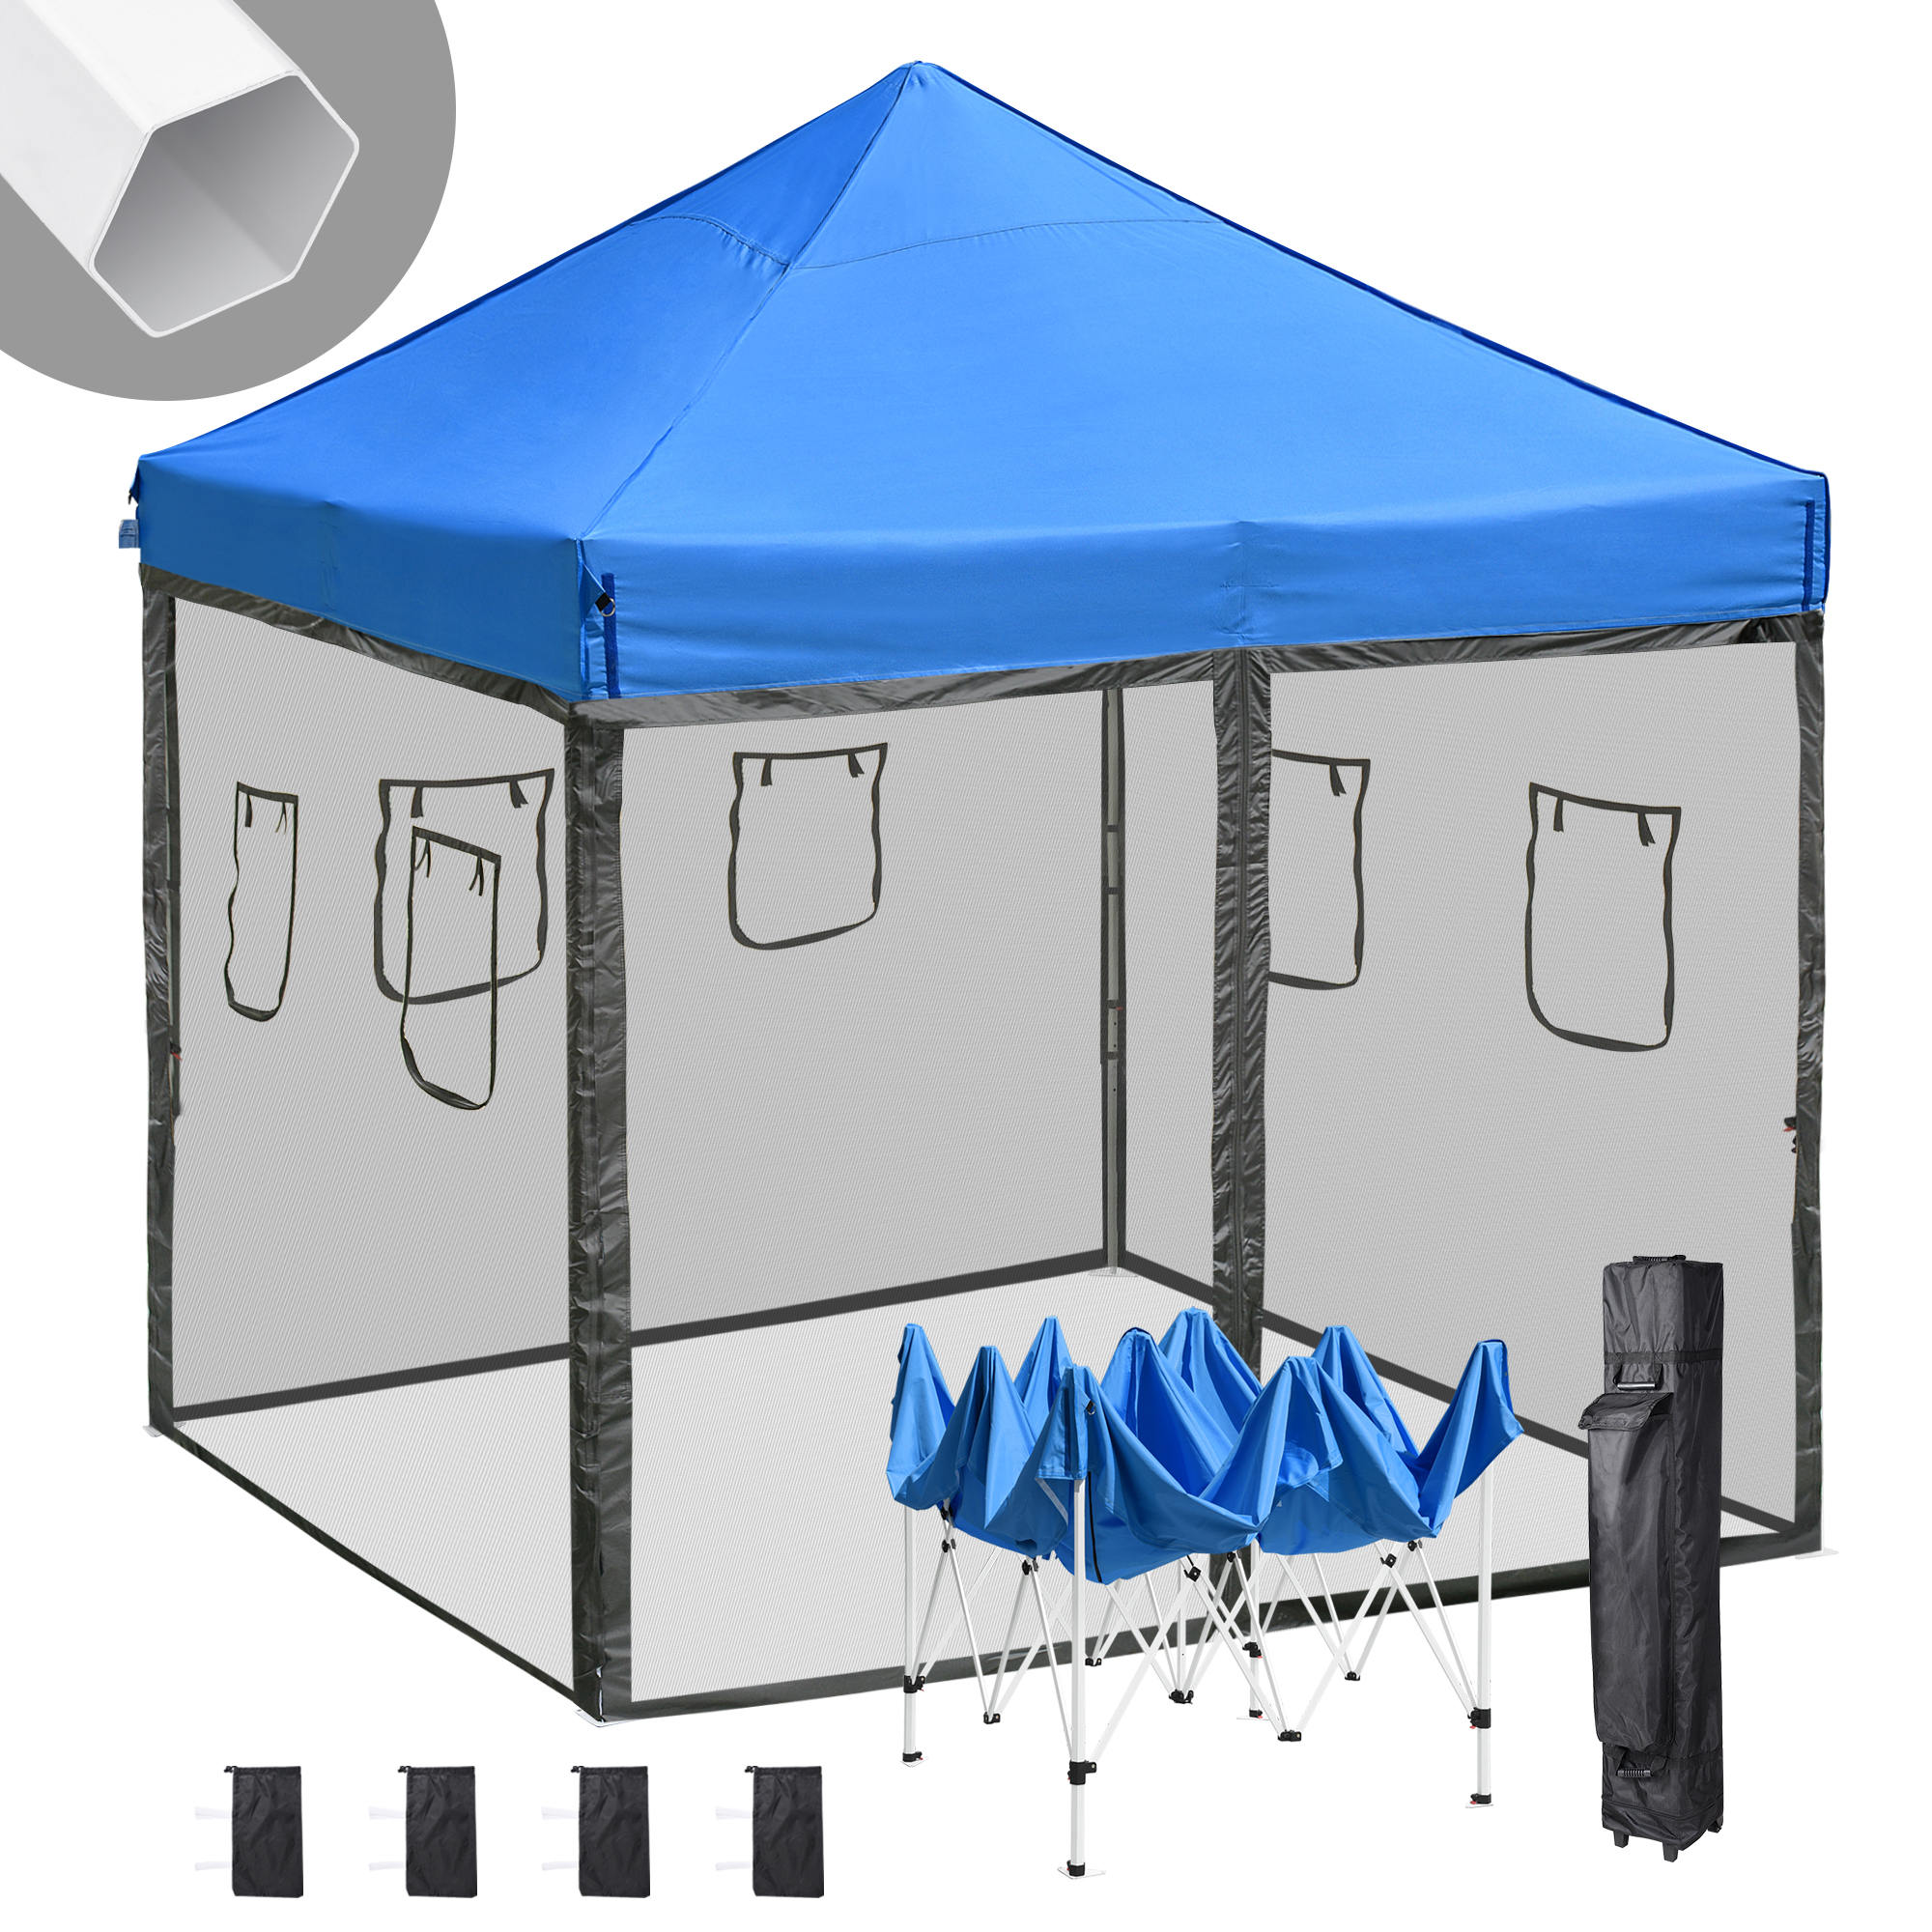 Instahibit 10x10 ft Pop Up Canopy Tent & 4 Mesh Sidewall Instant Shelter Market - image 1 of 11